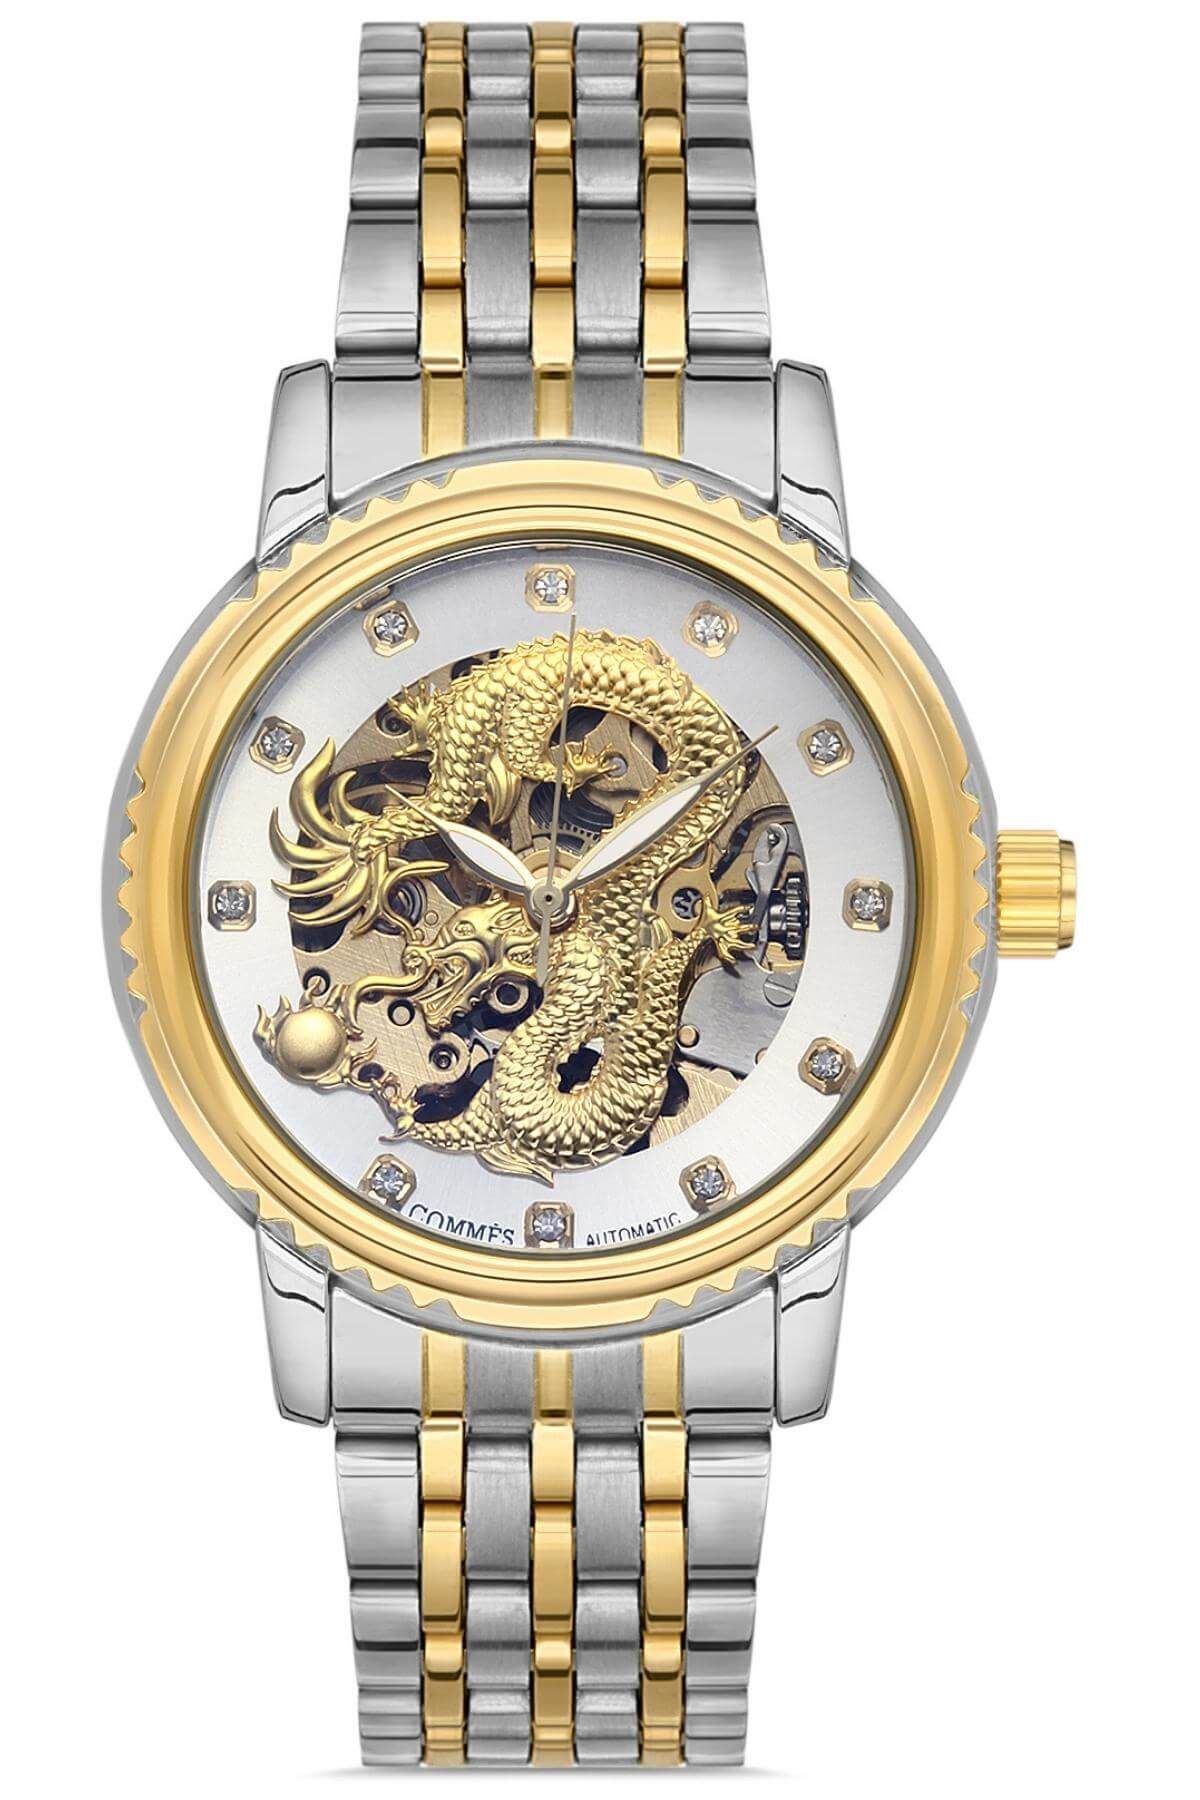 FLENT Man Automatic Self Wind Watch, Men Wristwatches, Gold and Silver  Skeleton Watch Hollow Engraving Leather Strap watches